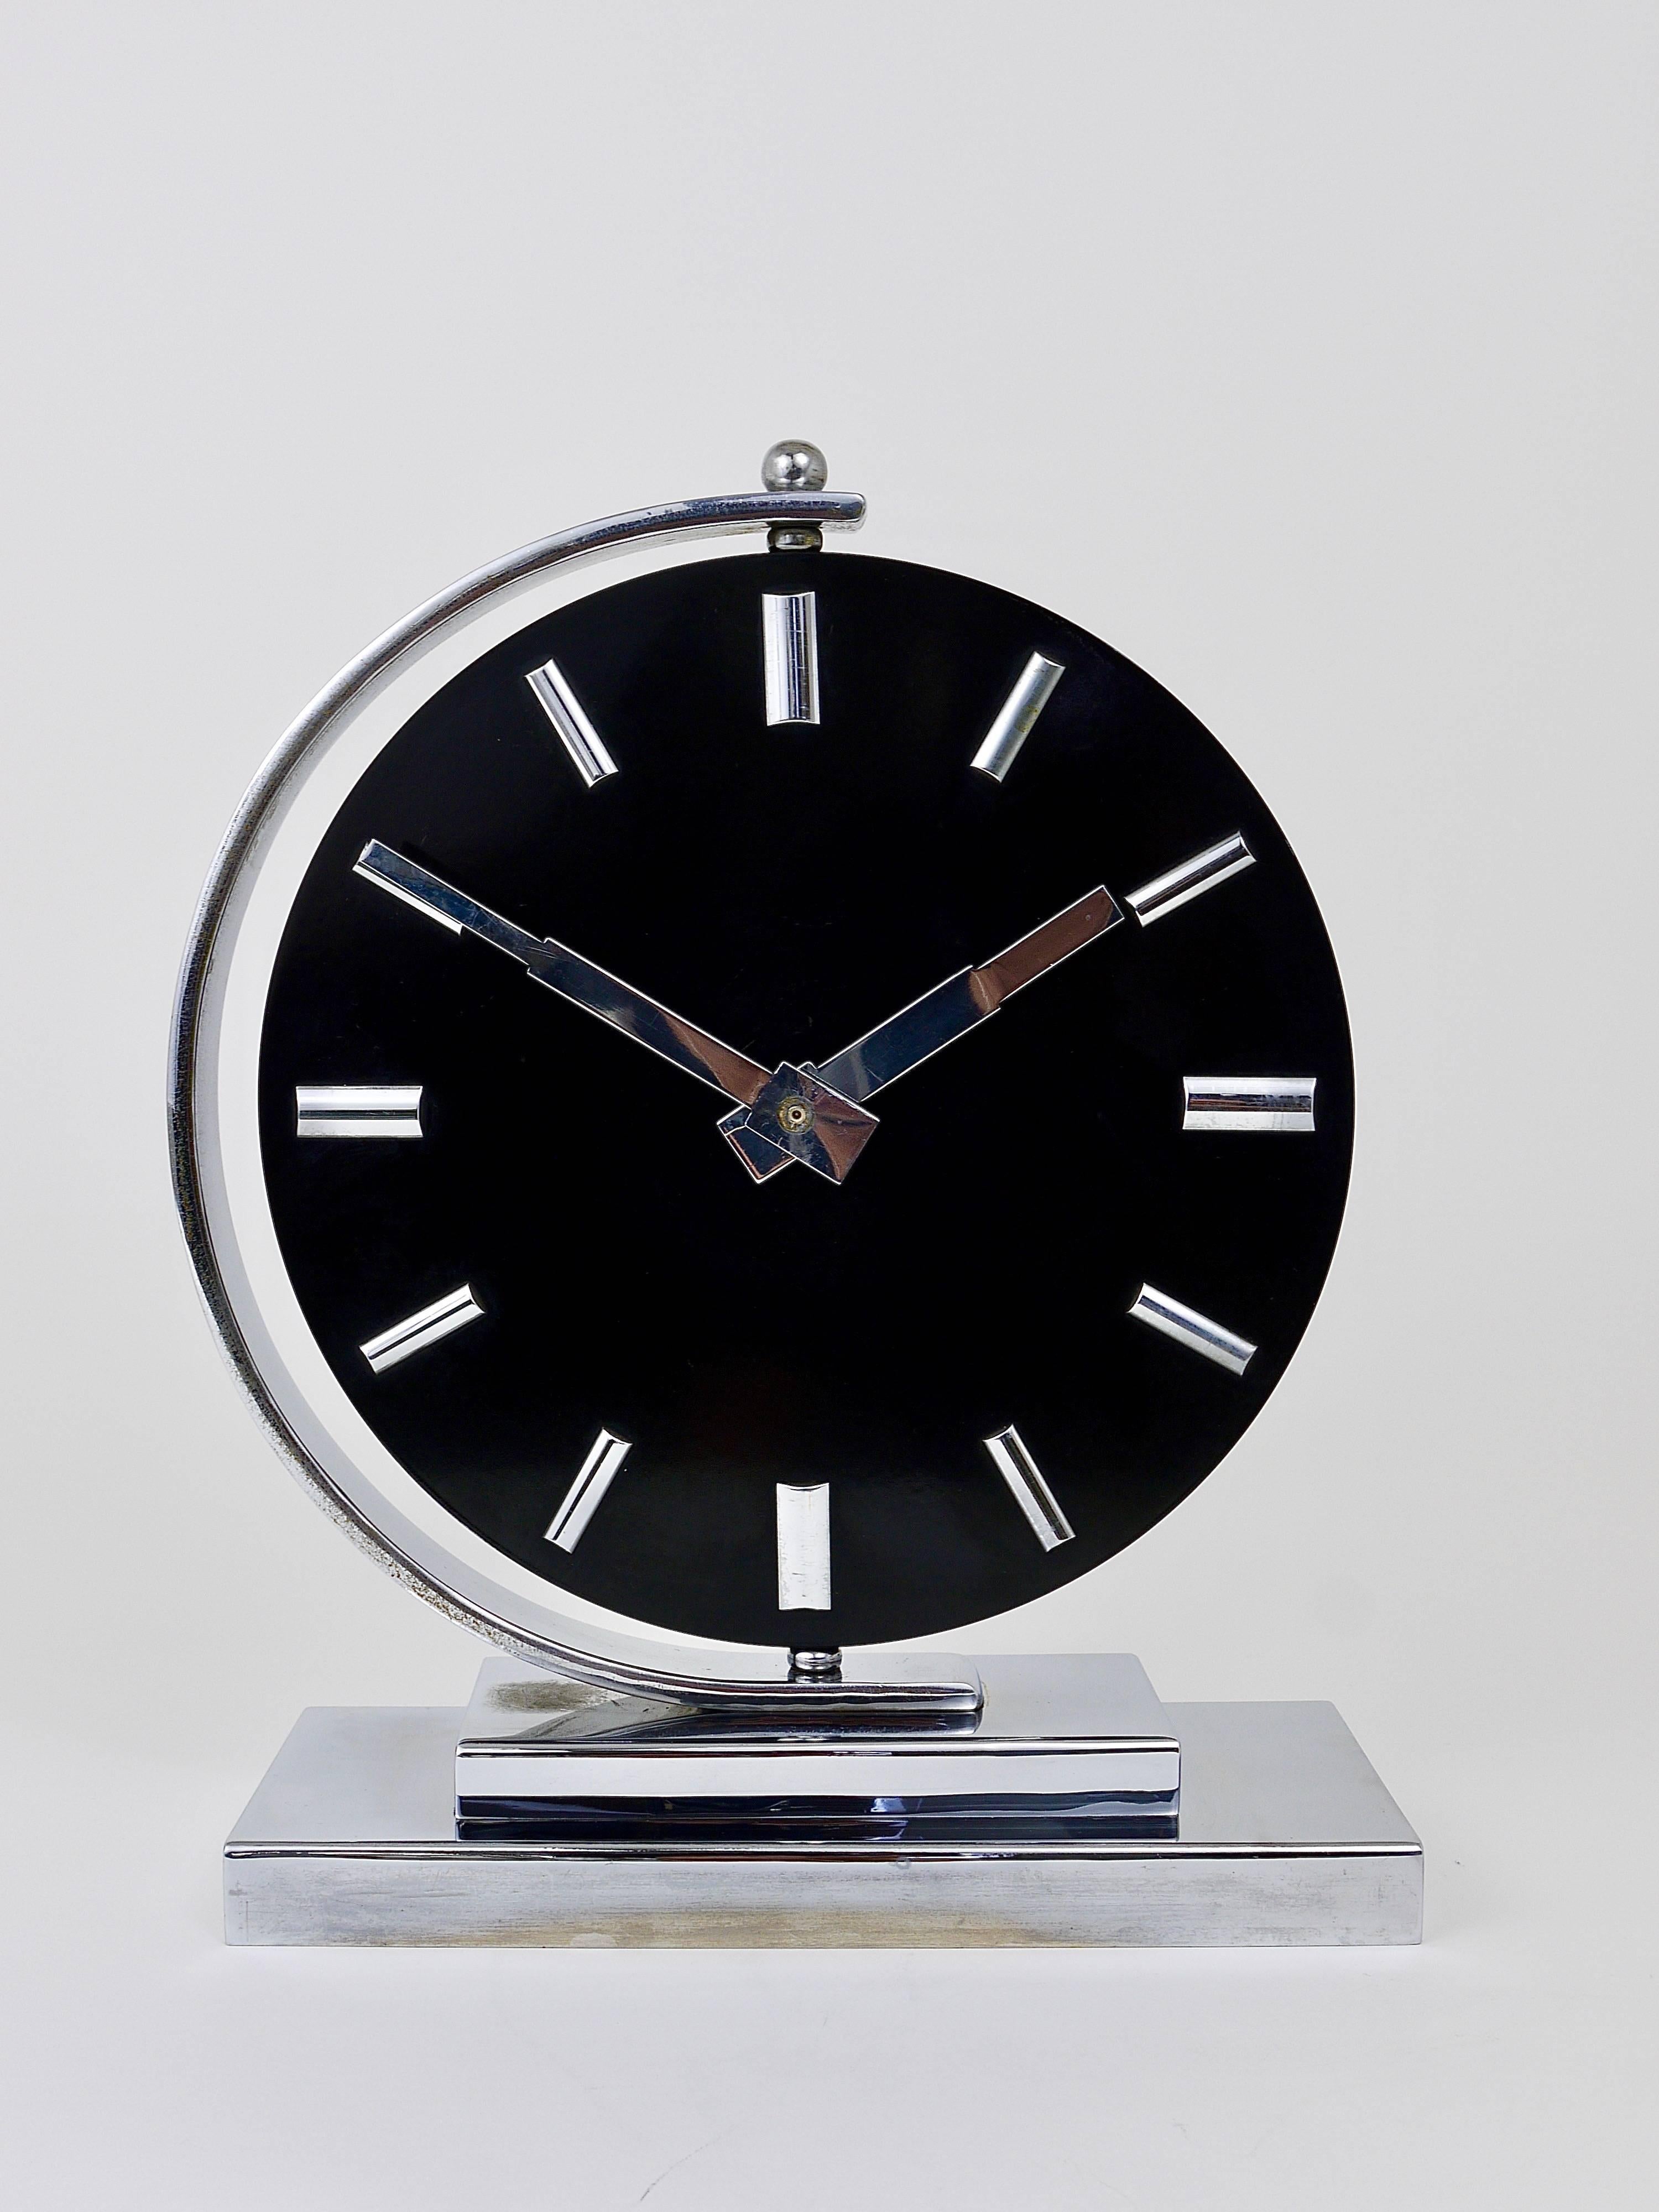 A black and nickel Art Deco table or desk clock from the 1930s, made in Germany. It has a square base made of nickel-plated brass, the black clocks face is 360 degrees rotatable, the hands and indices are also nickel-plated. Powered by a quartz